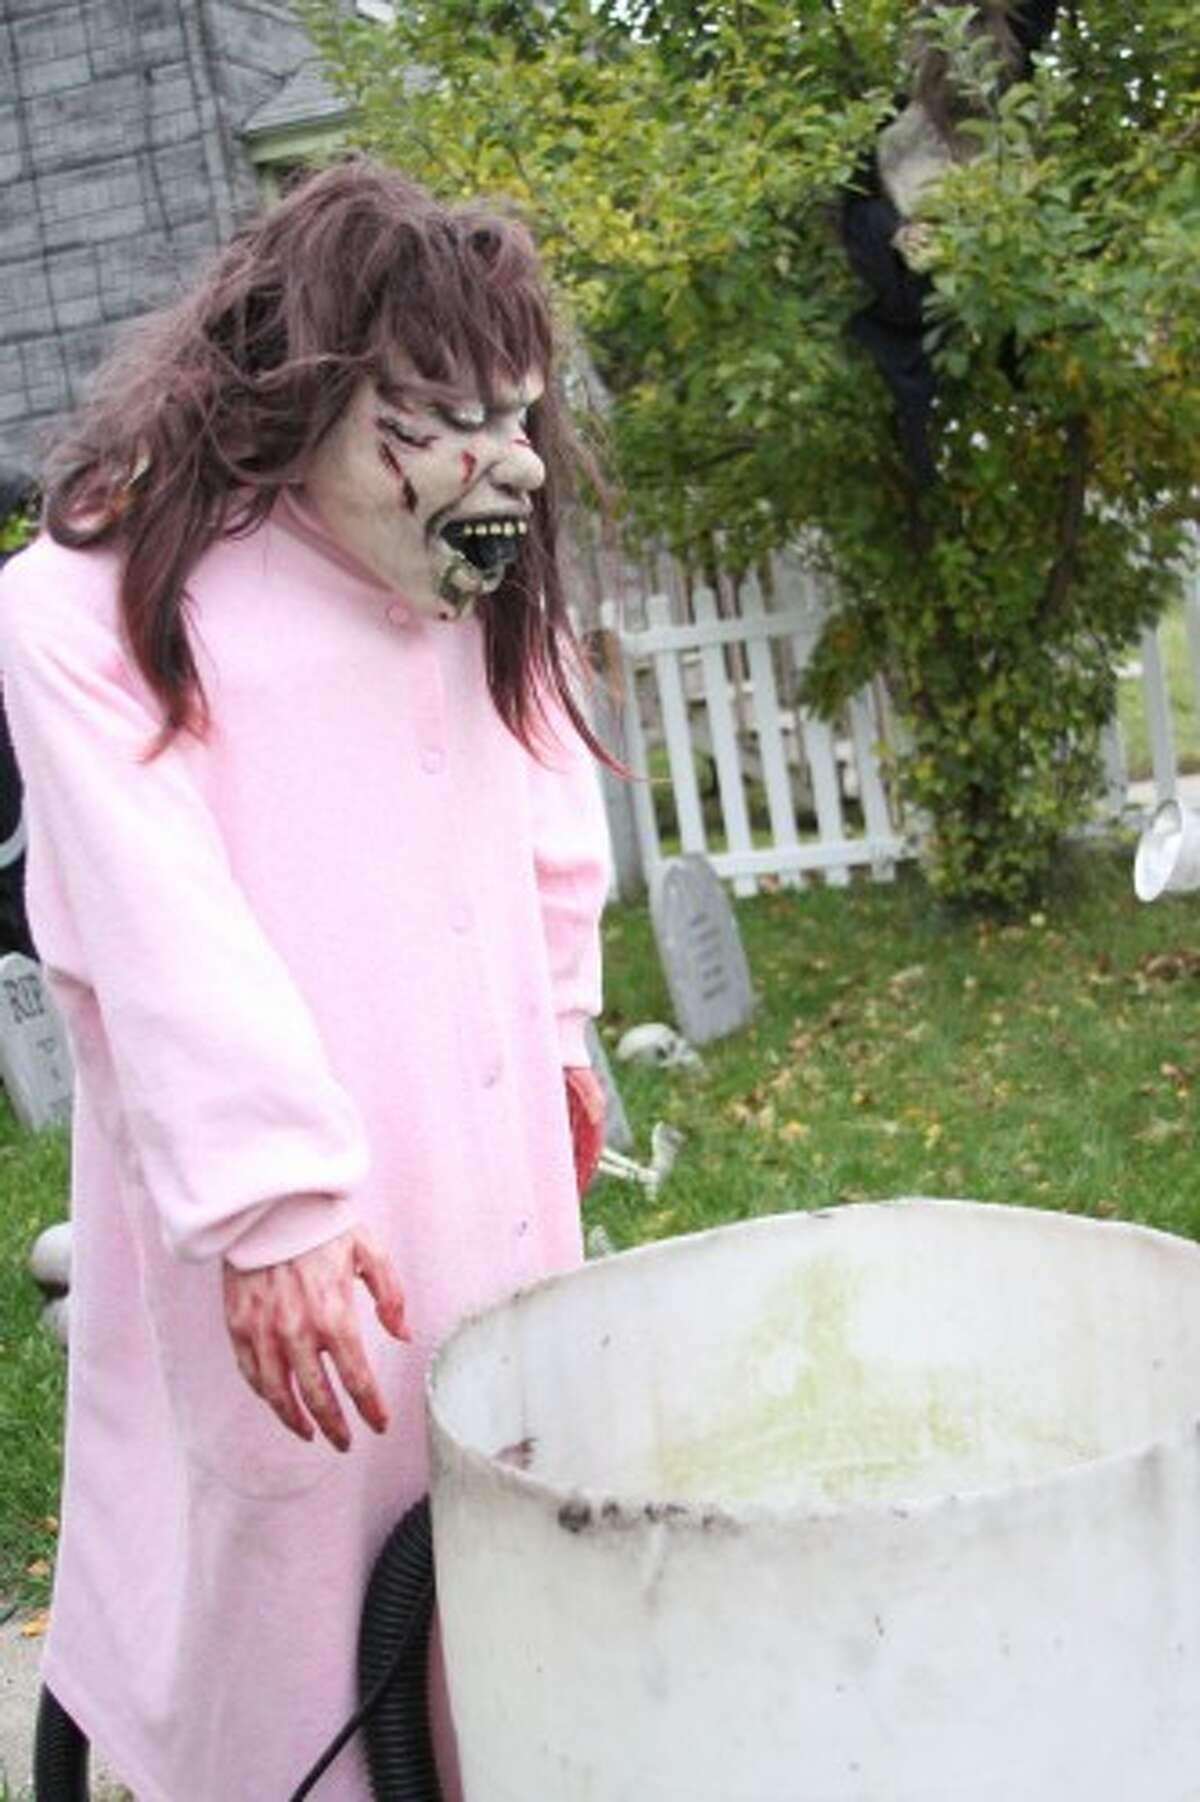 Inspired by the film The Exorcist, one of the Olen's attractions at their home is "the puker", a vomit spewing animatronic Halloween decoration. (Sean Bradley/News Advocate)